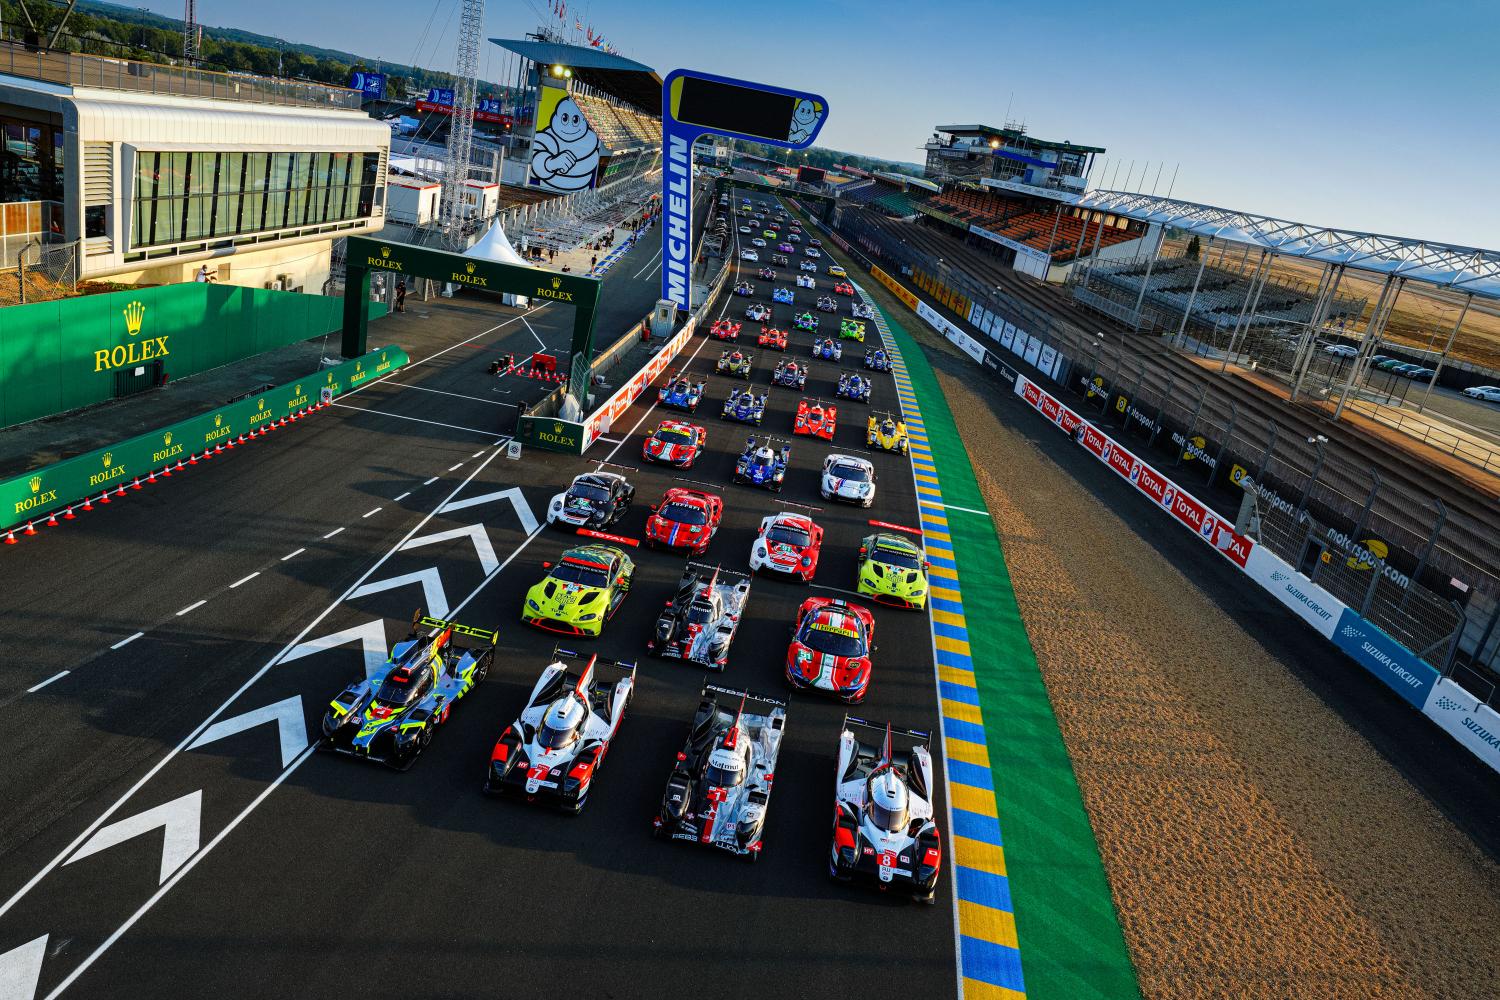 The grid for the 24 hour of Le Mans endurance race.